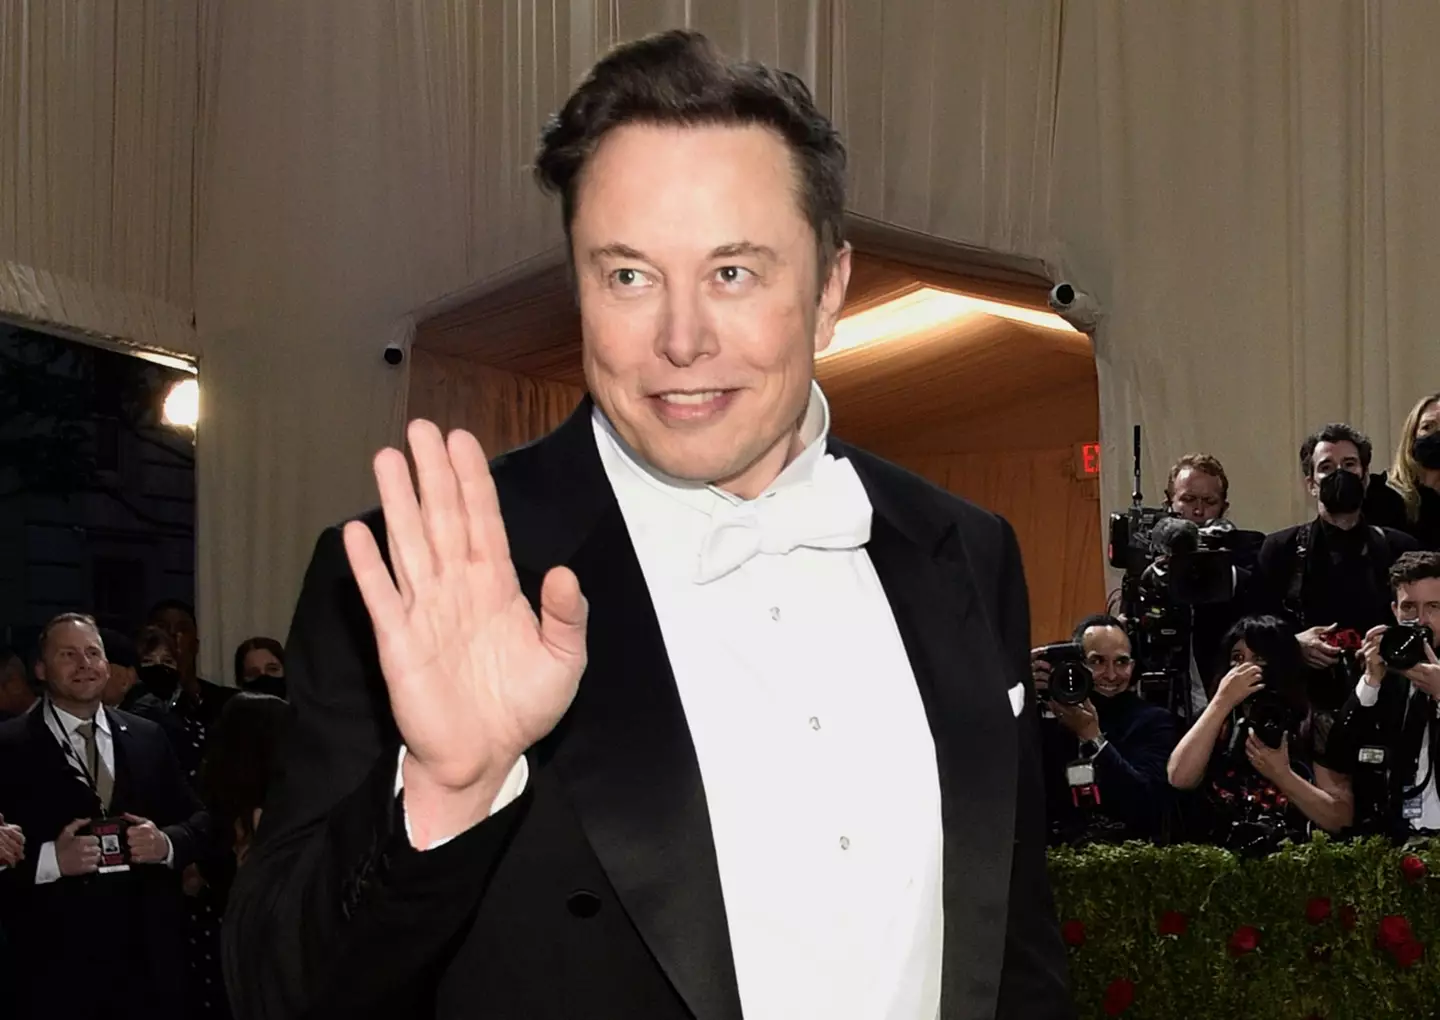 Elon Musk previously said Starship would launch into orbit this year.